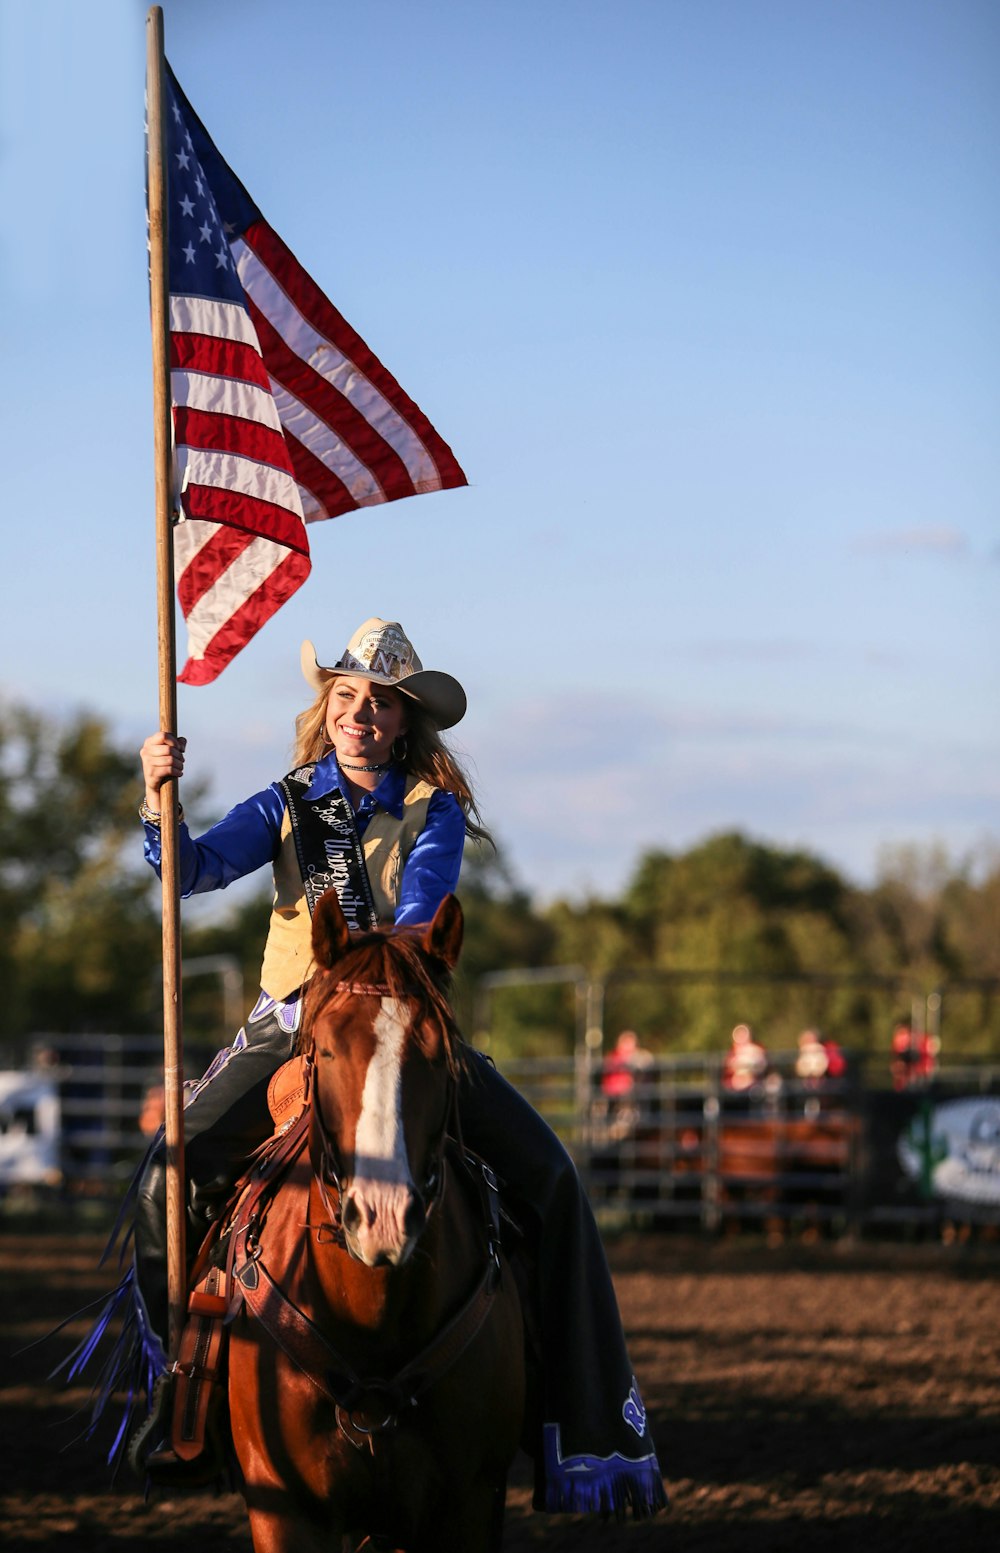 a woman riding on the back of a brown horse holding a flag